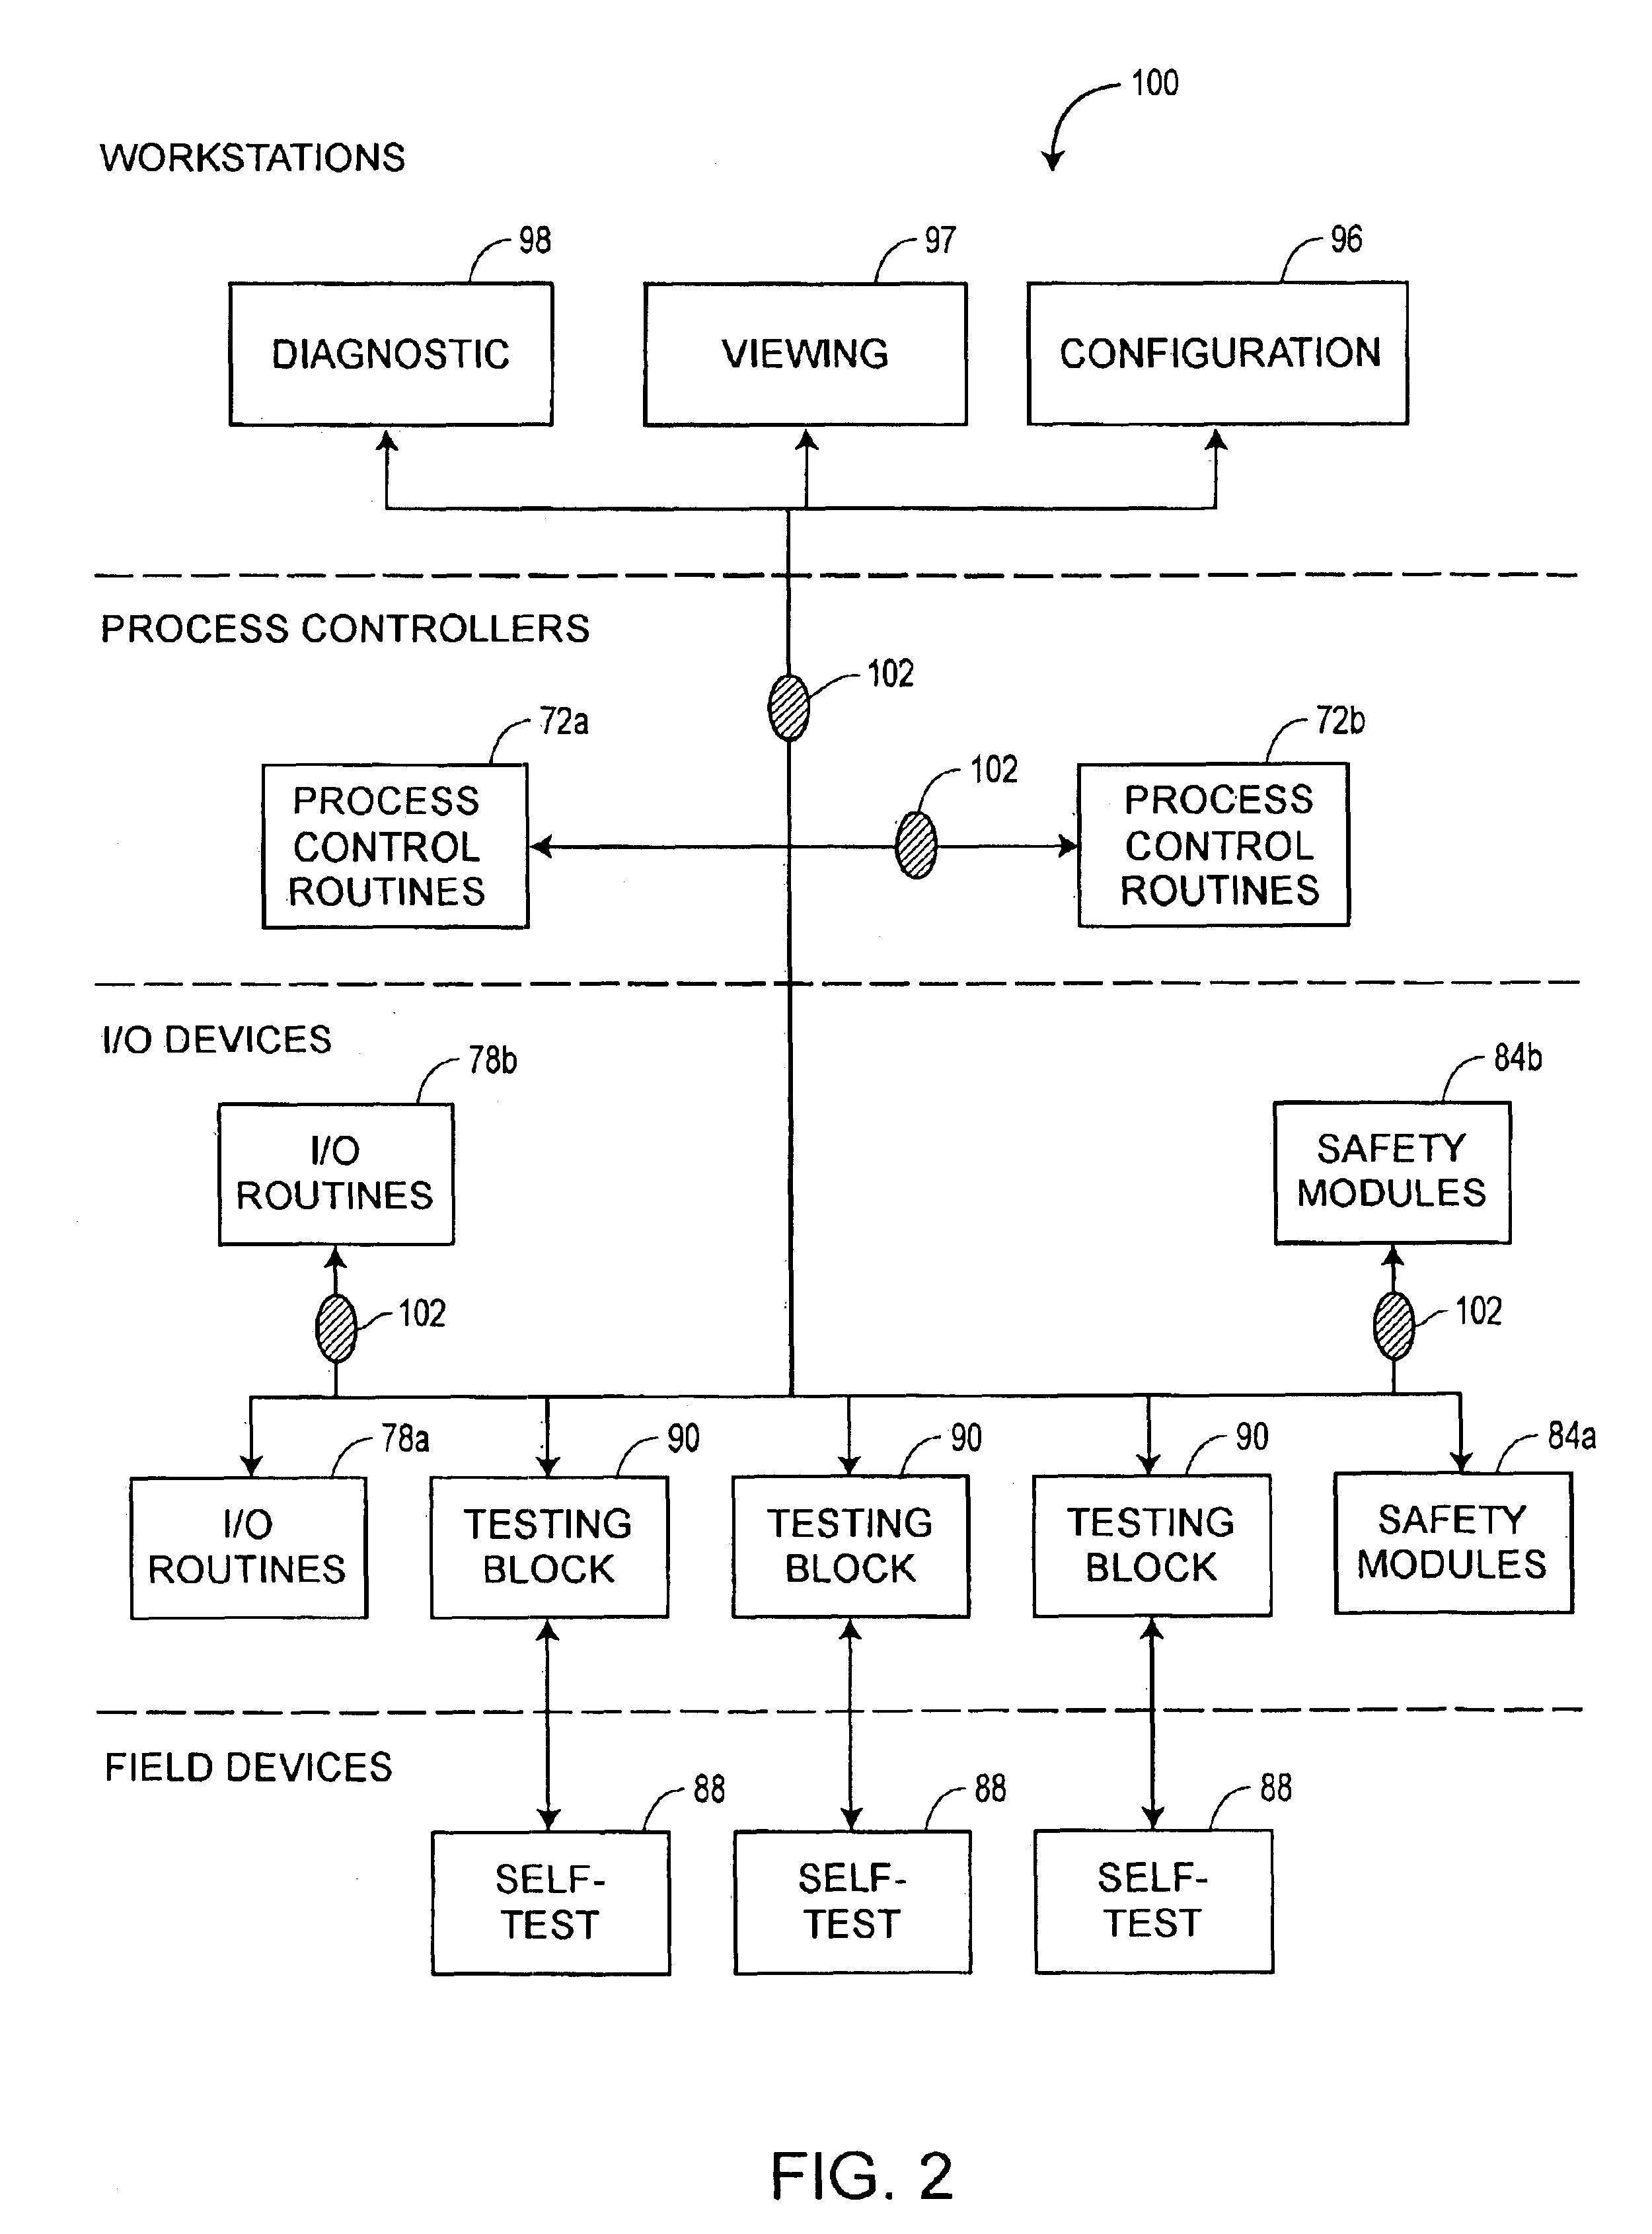 On-line device testing block integrated into a process control/safety system